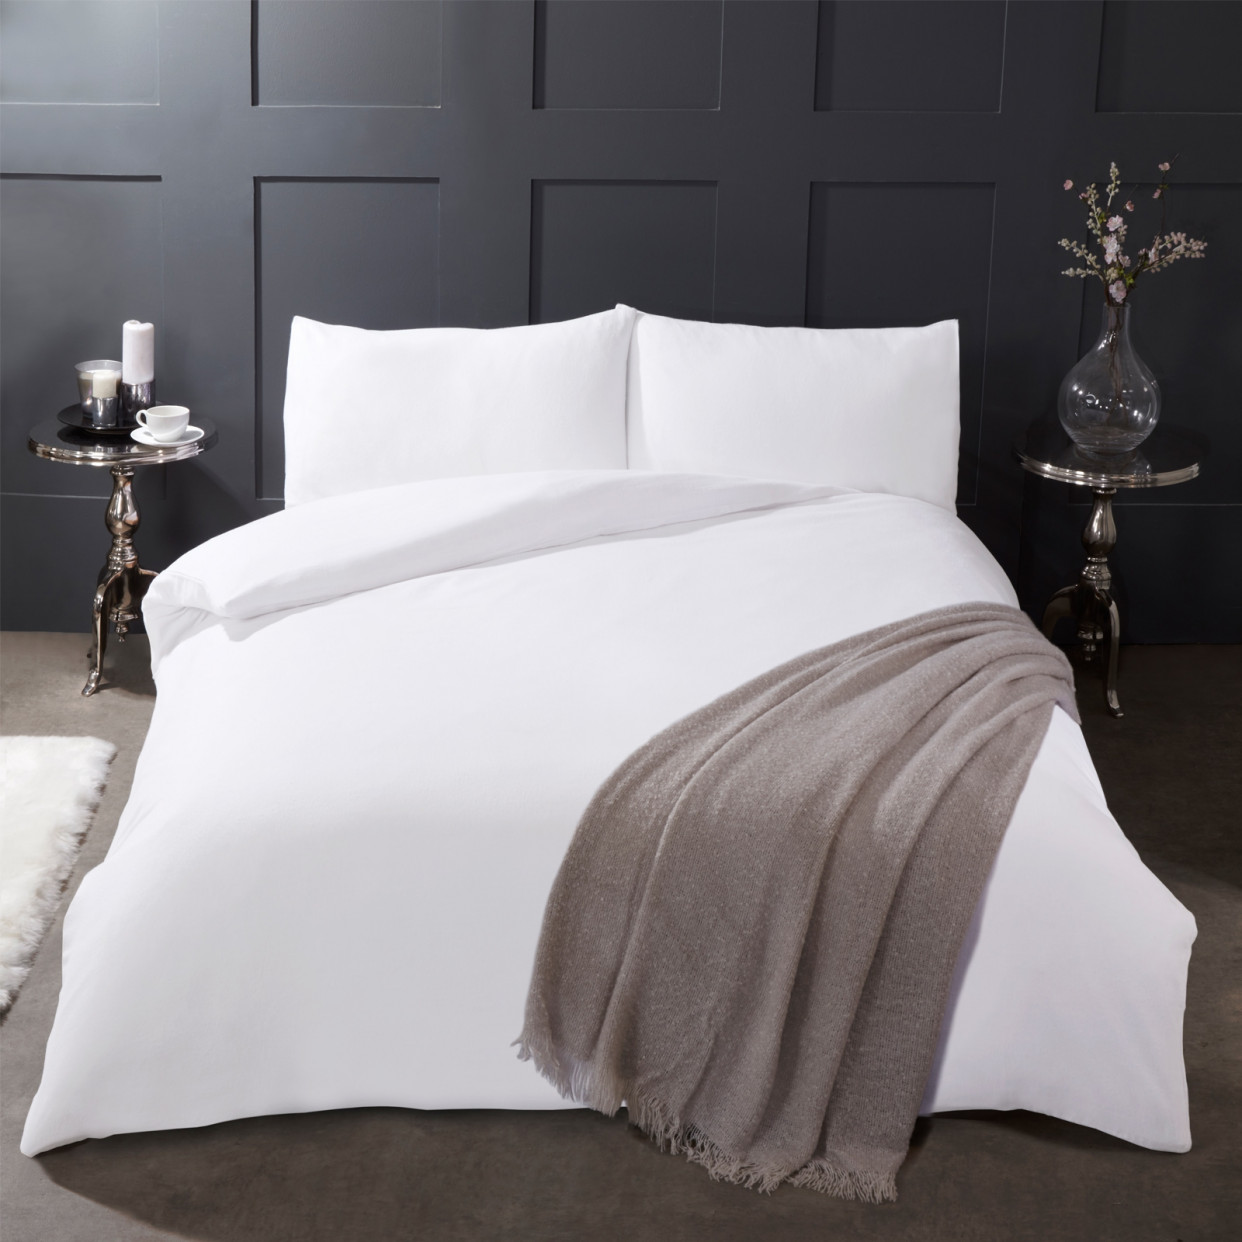 Highams 100% Brushed Cotton Duvet Cover with Pillowcase Plain Flannelette Thermal Bedding Set, Pure White - Superking>